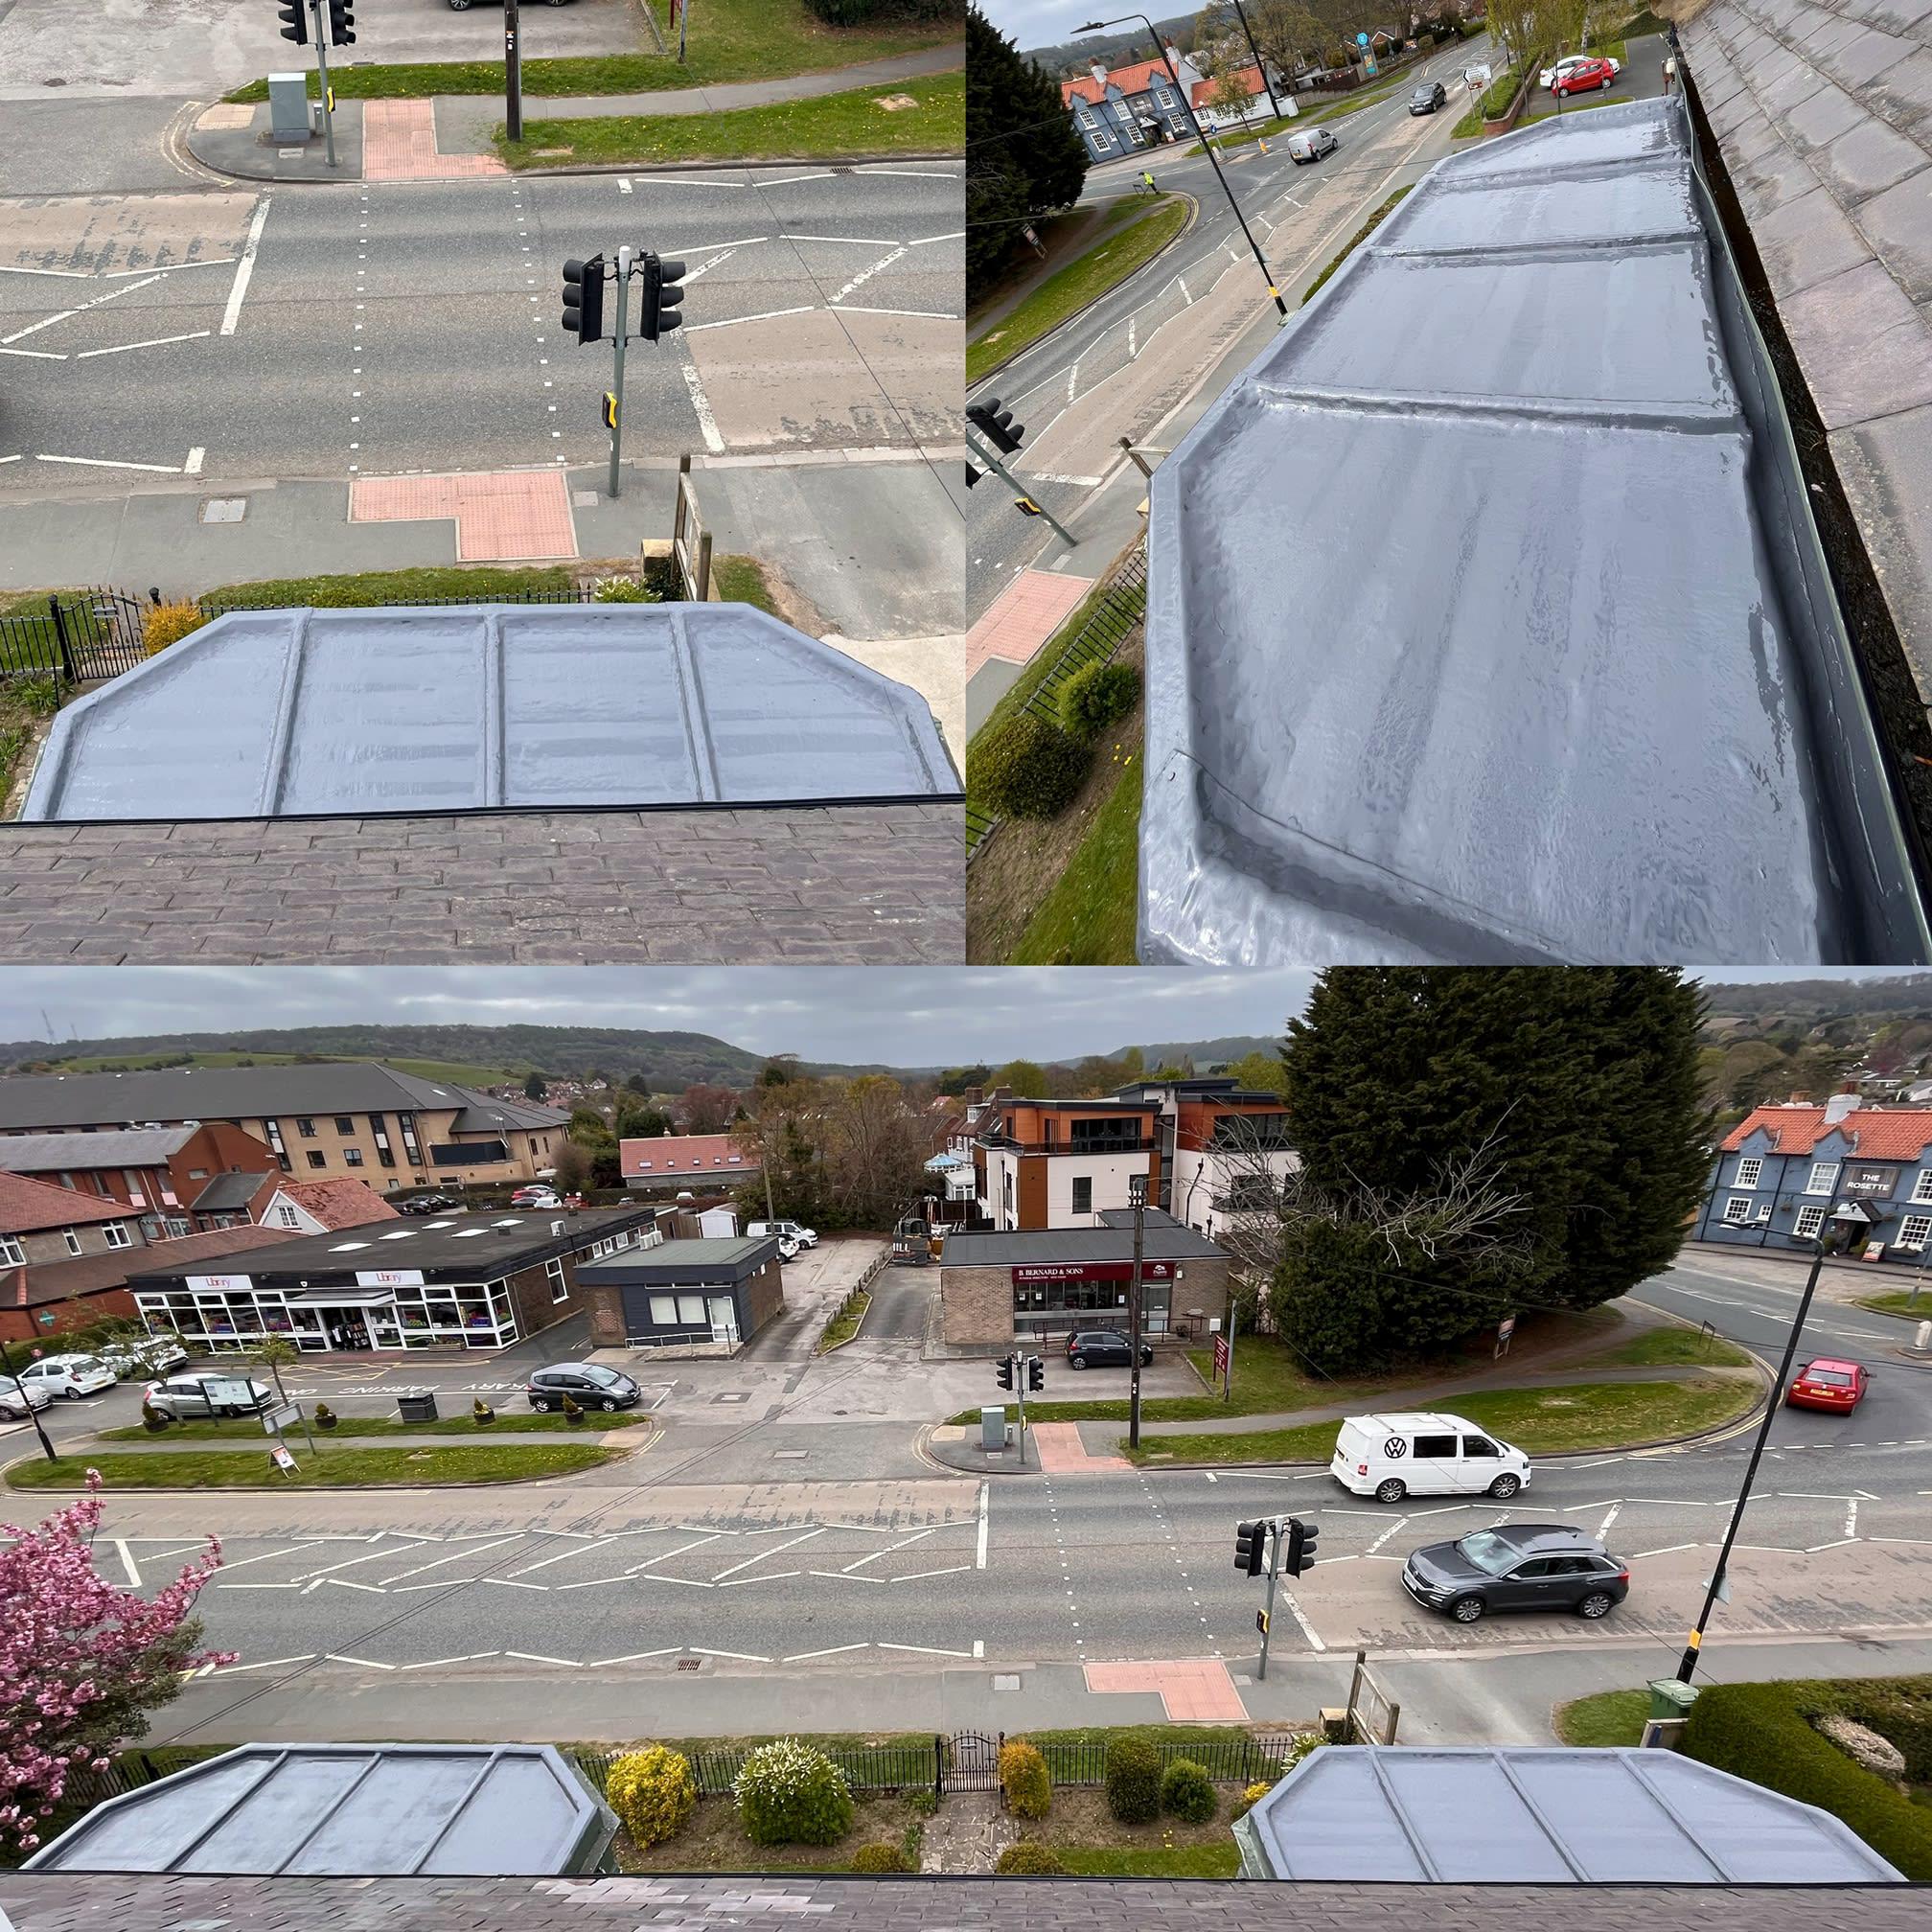 Rowley Roofing Services Scarborough 07561 708448